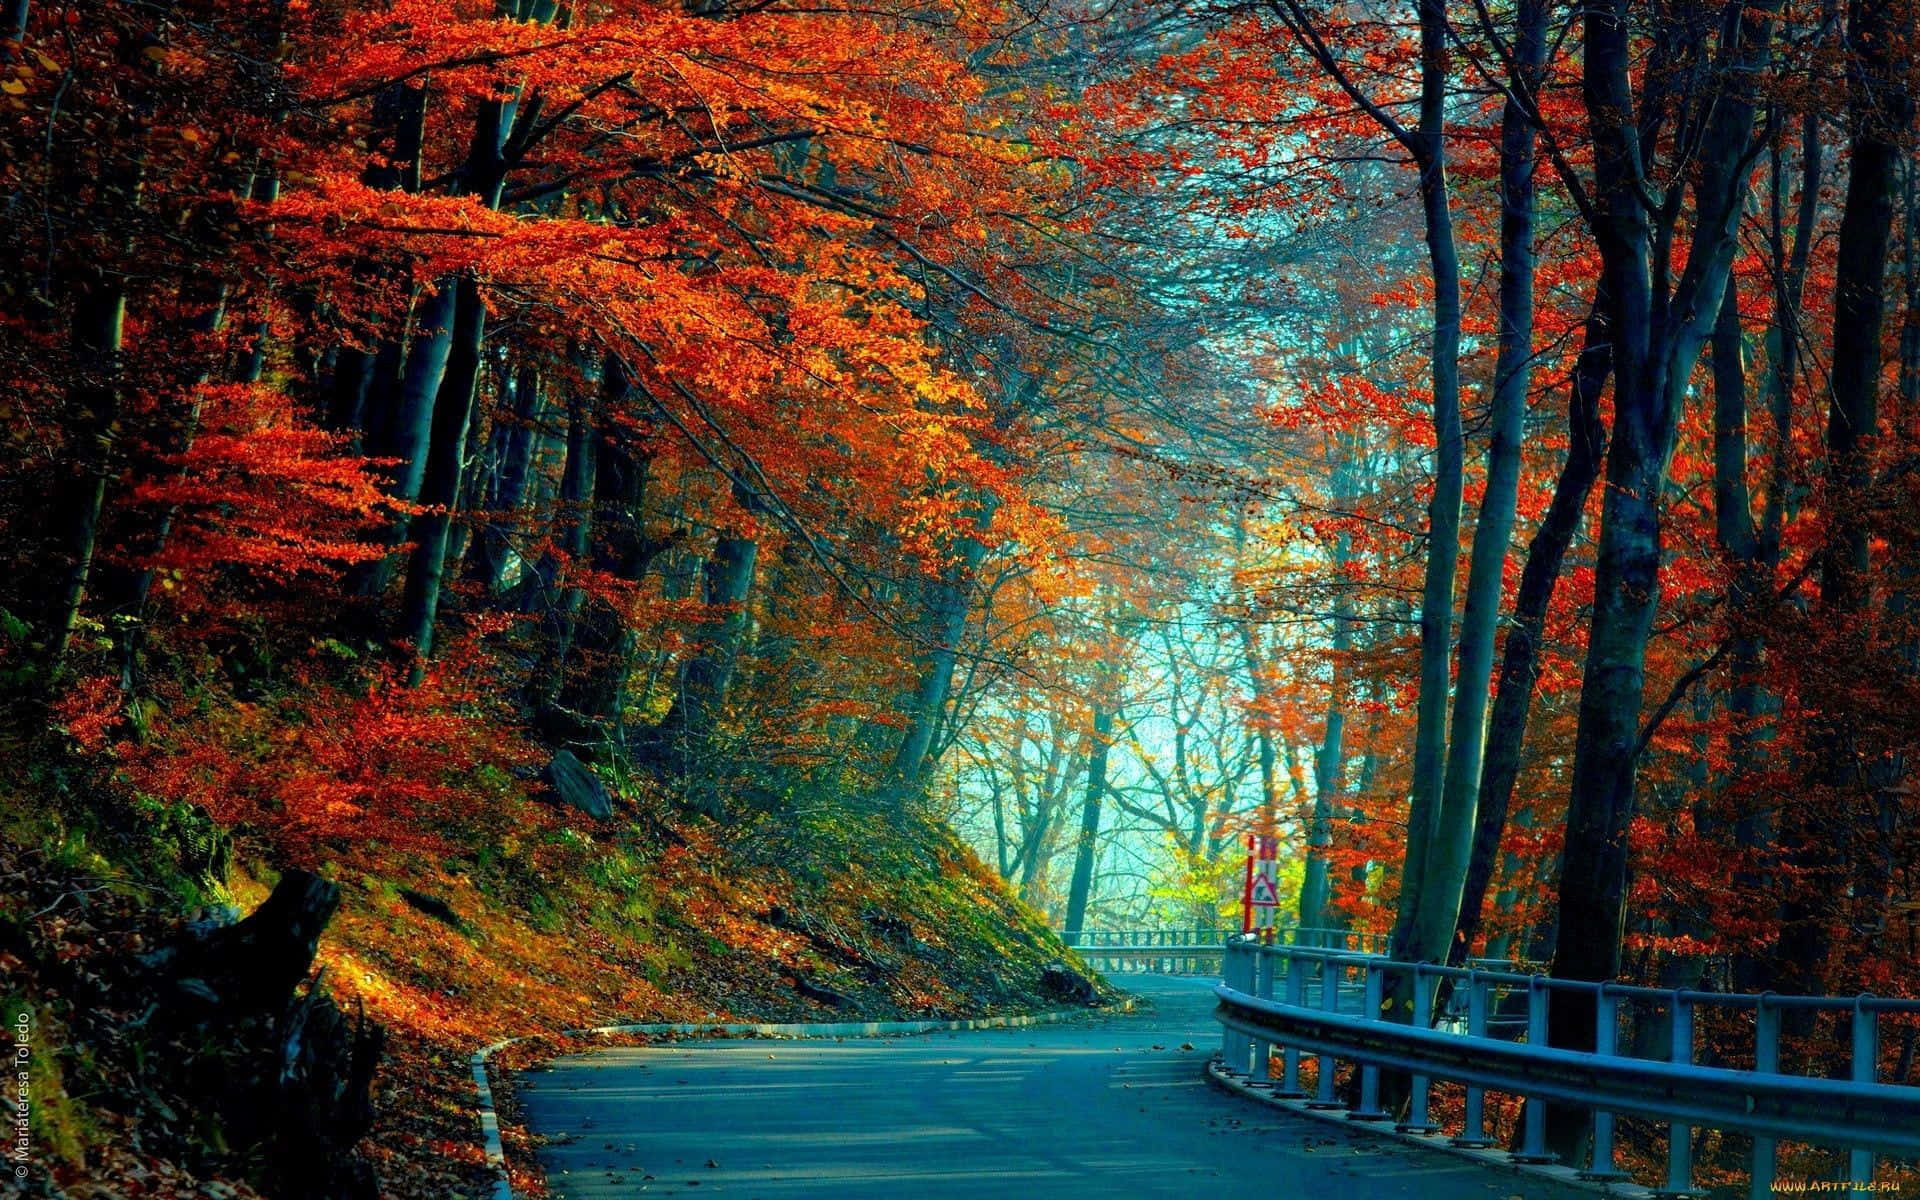 A Road In The Woods With Red And Orange Leaves